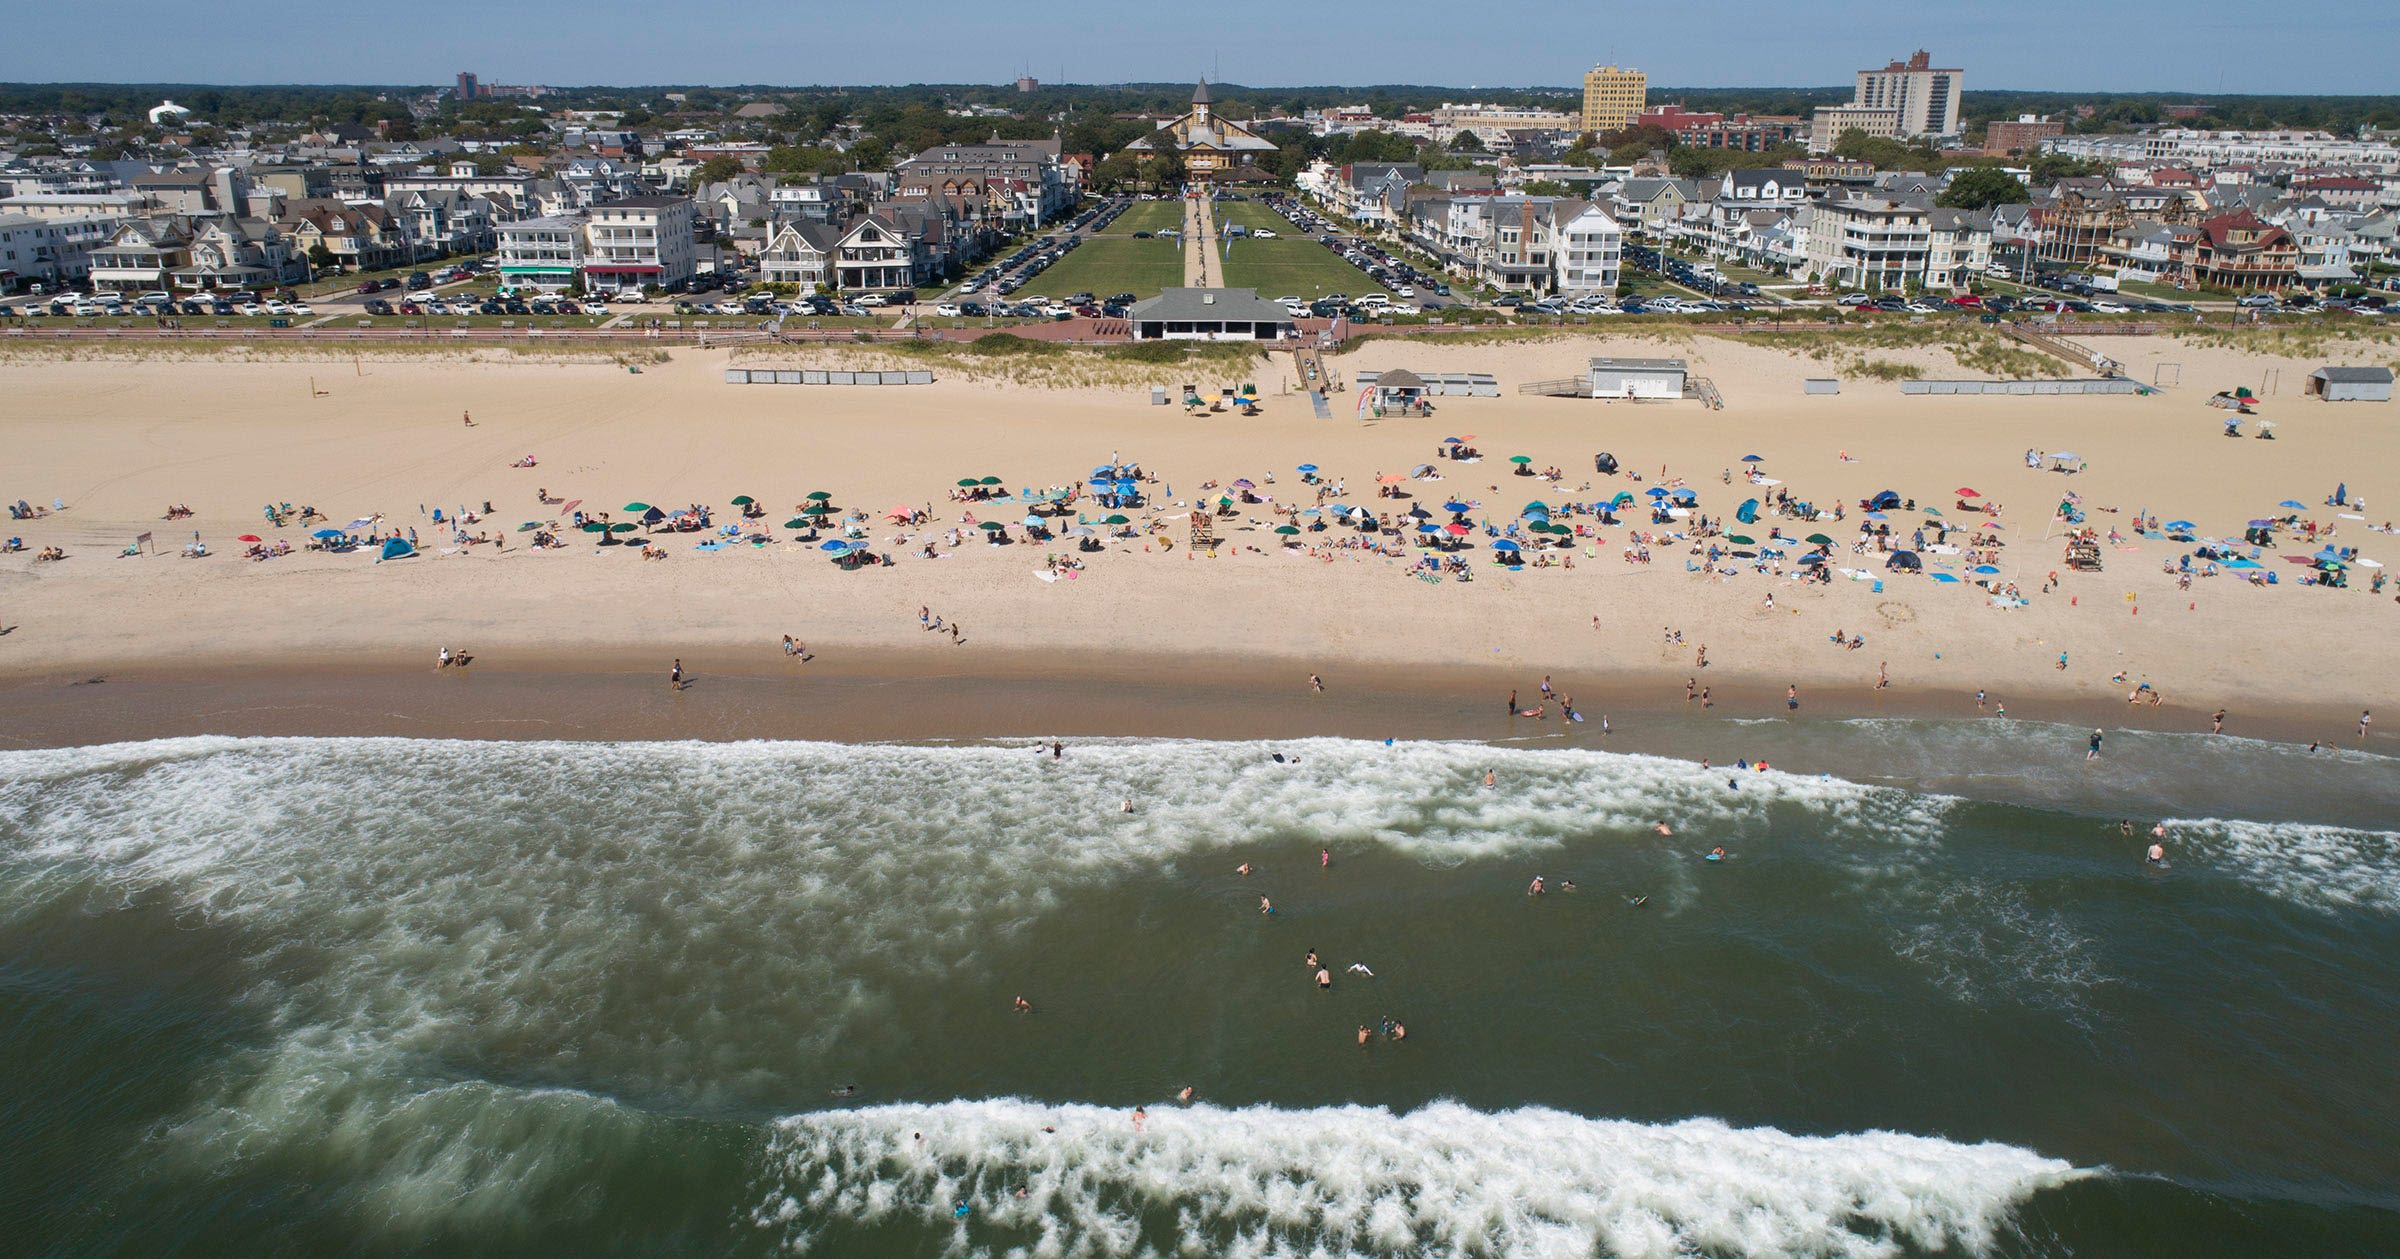 Ocean Grove surrenders on allowing Sunday morning beach access, at least for now